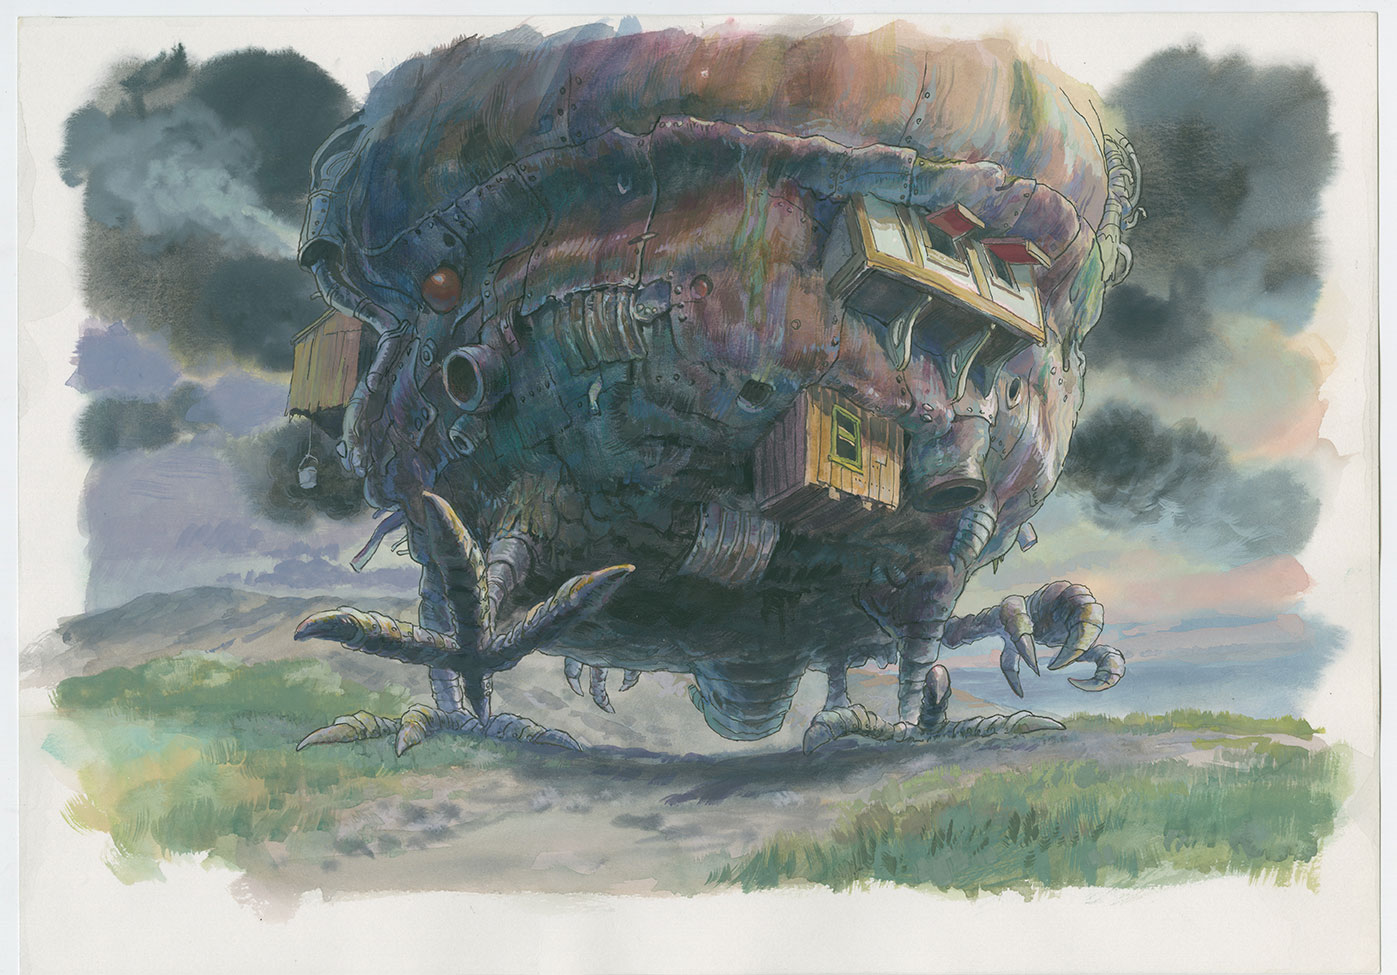 Production imageboard, "Howl's Moving Castle." 